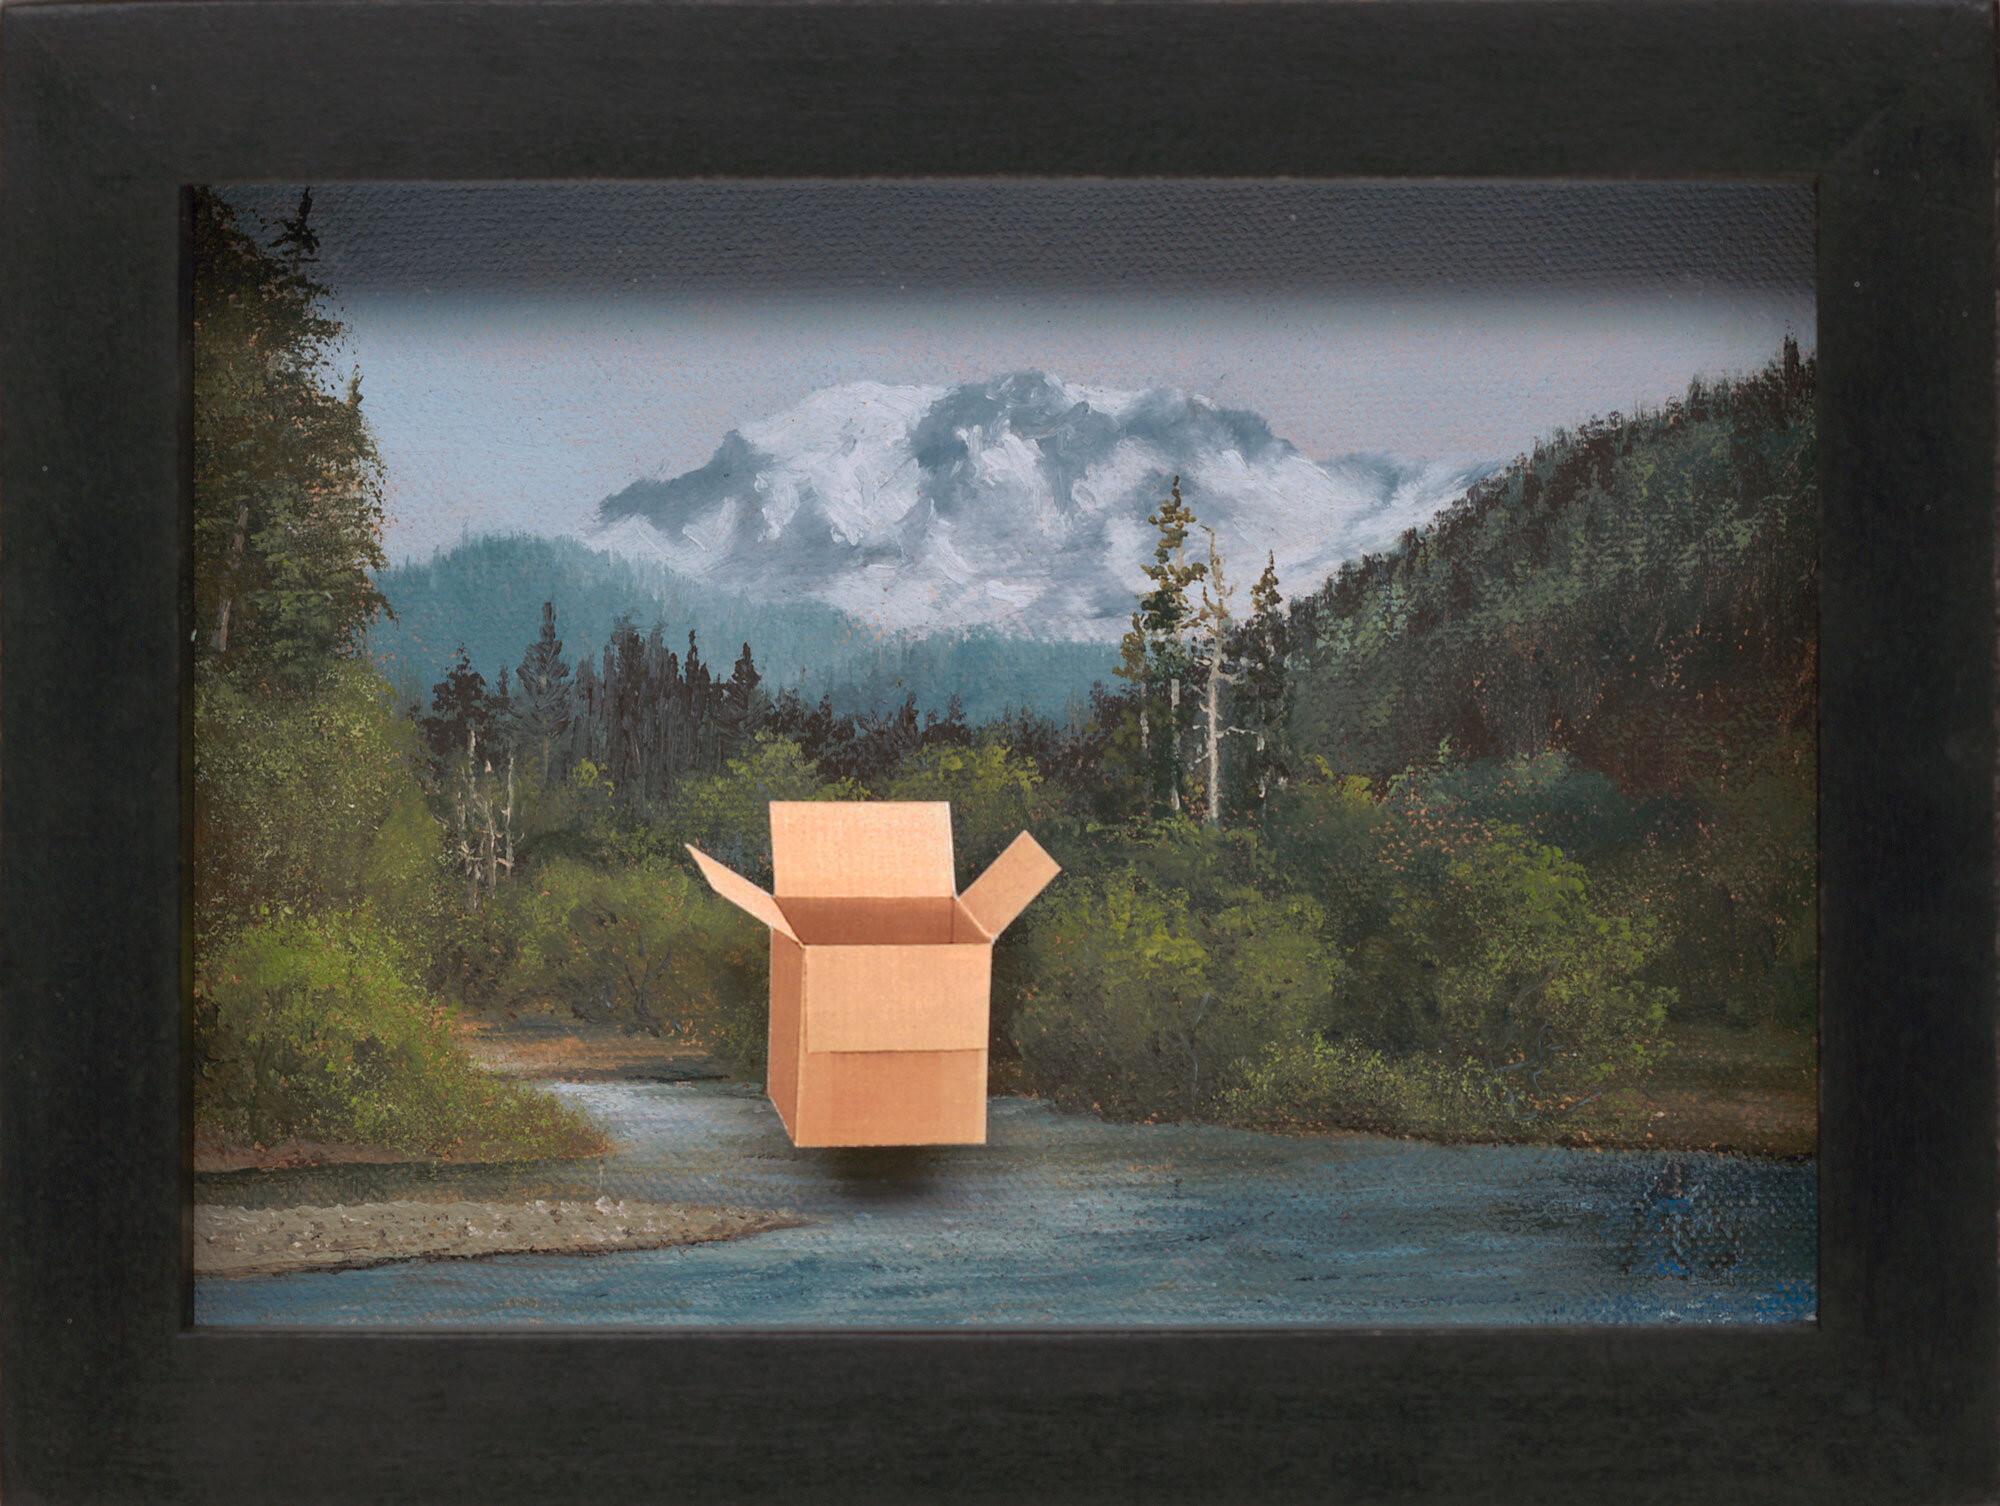    Untitled (Box, Mountain)   2009, found painting and printed matter, glass 5” x 7” 